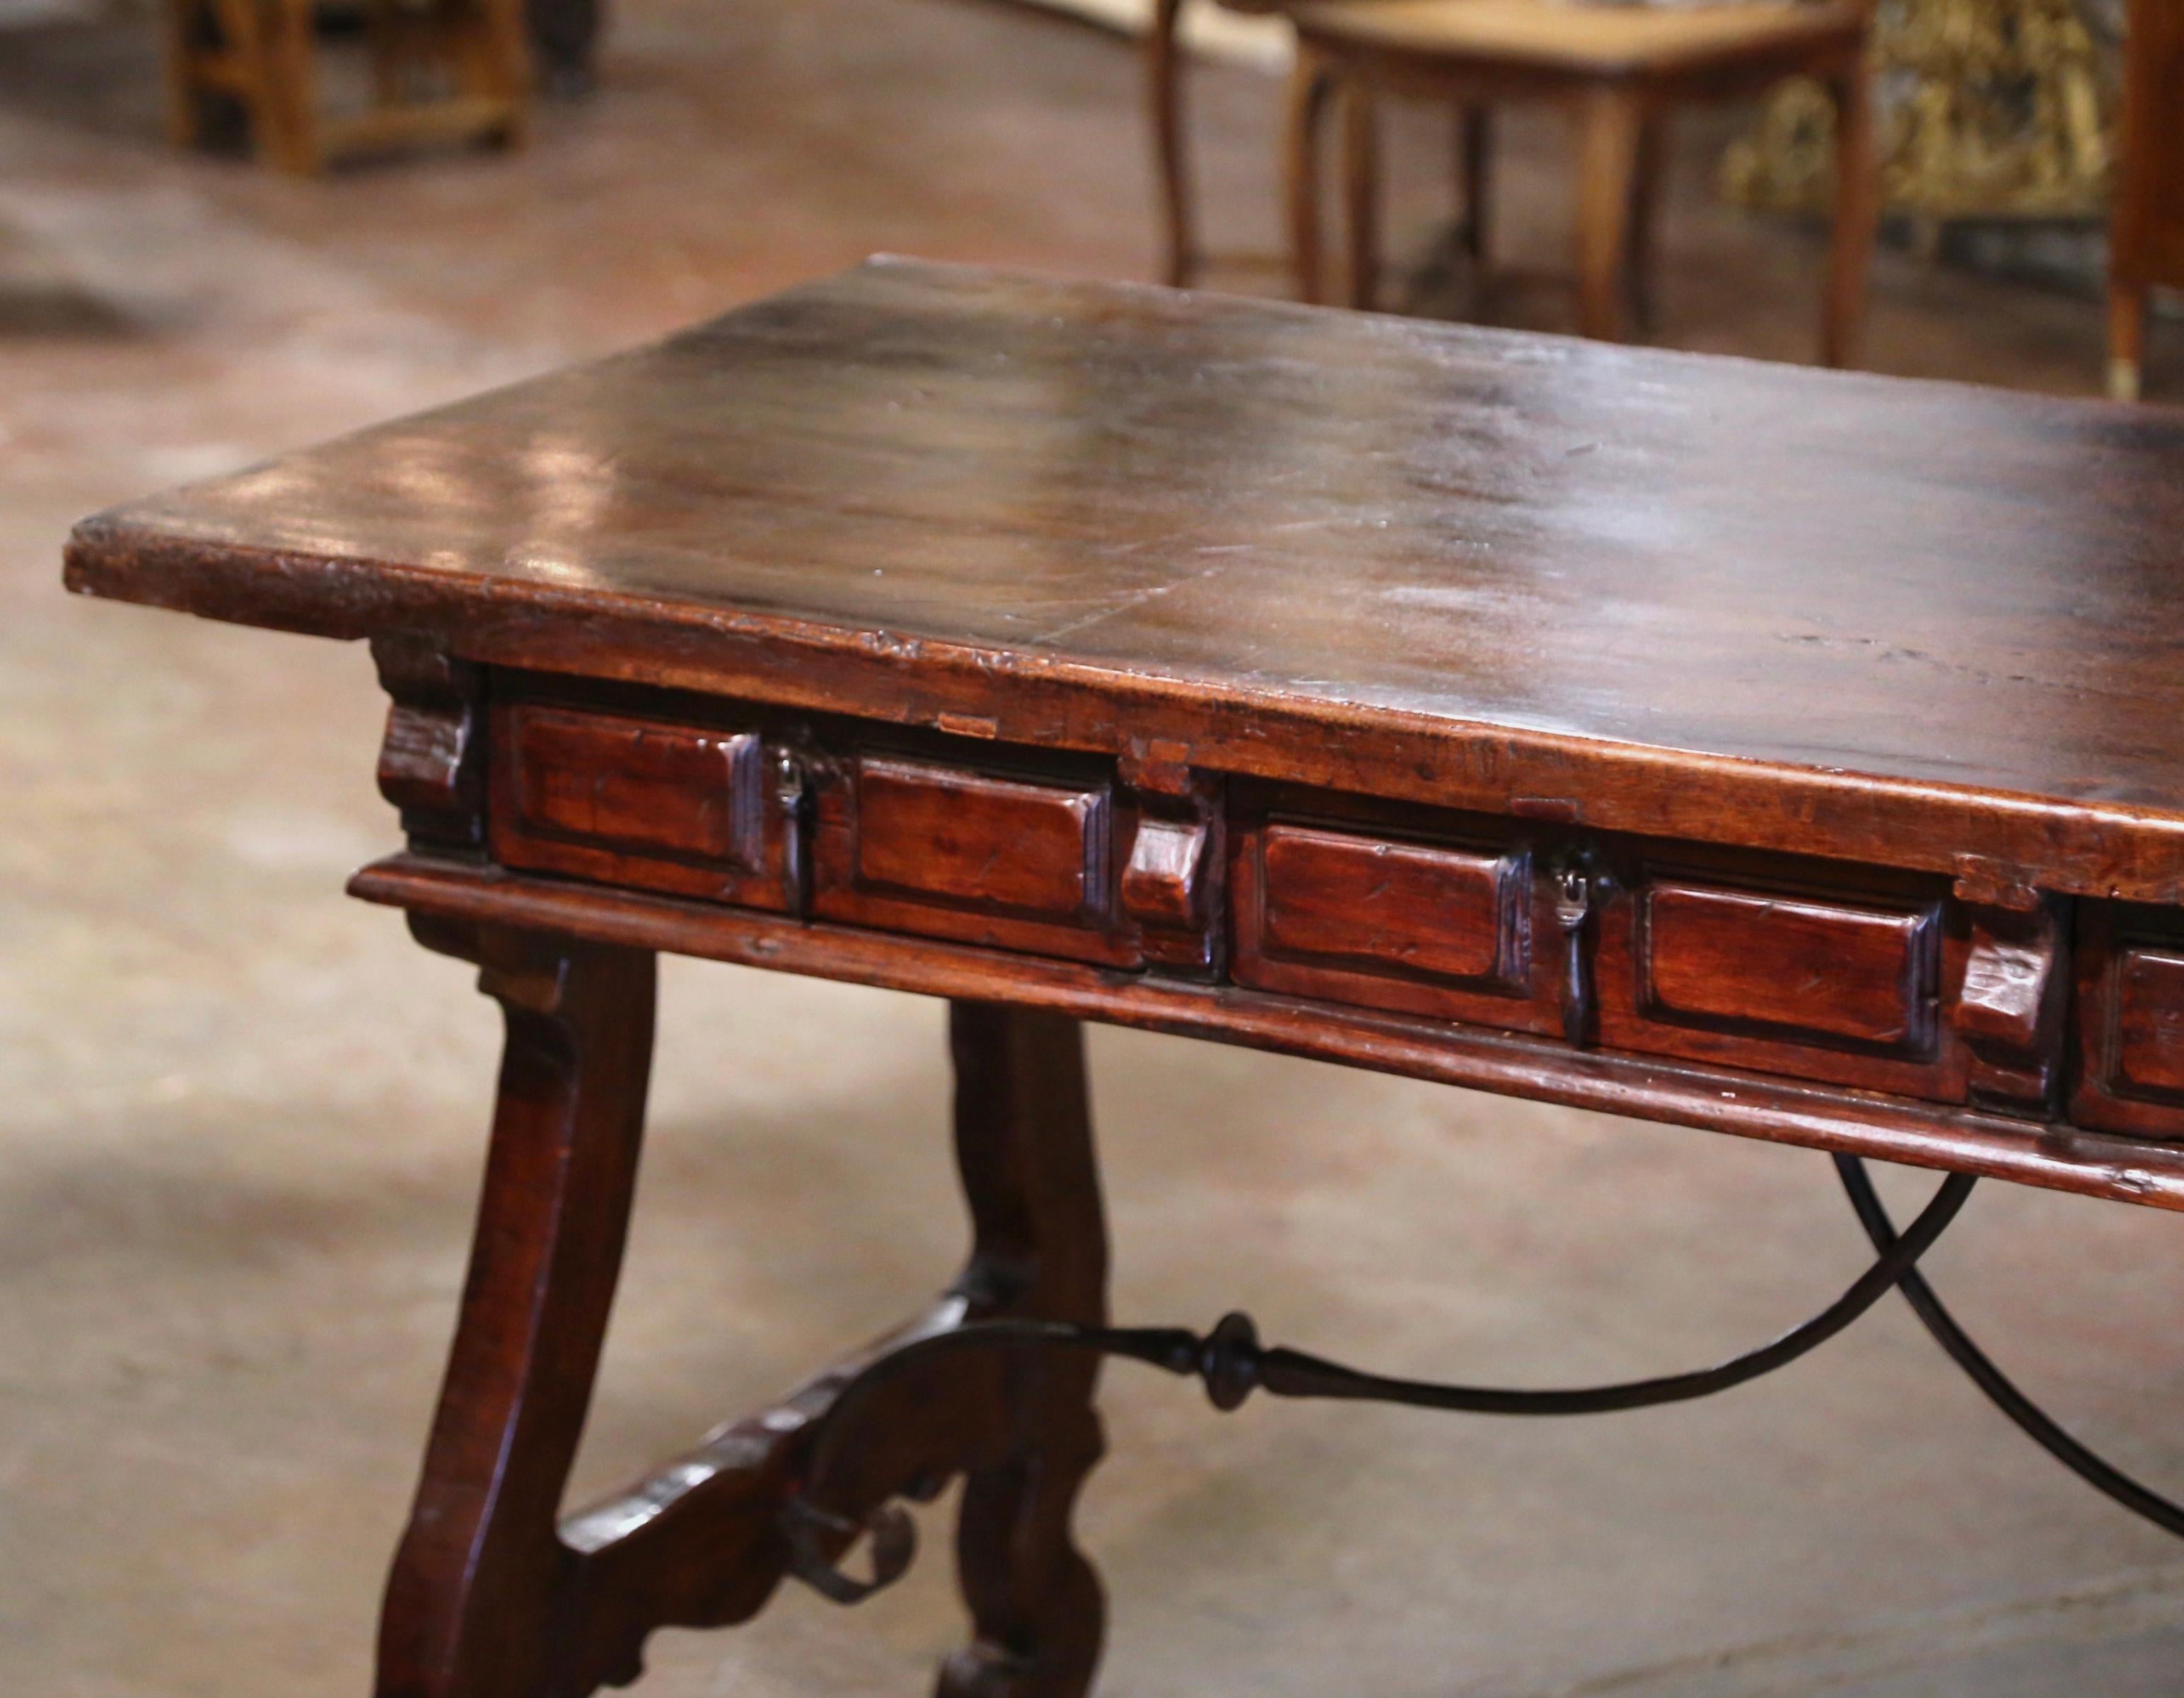 Hand-Carved 19th Century Spanish Carved Walnut & Iron Desk Table with Single Plank Top